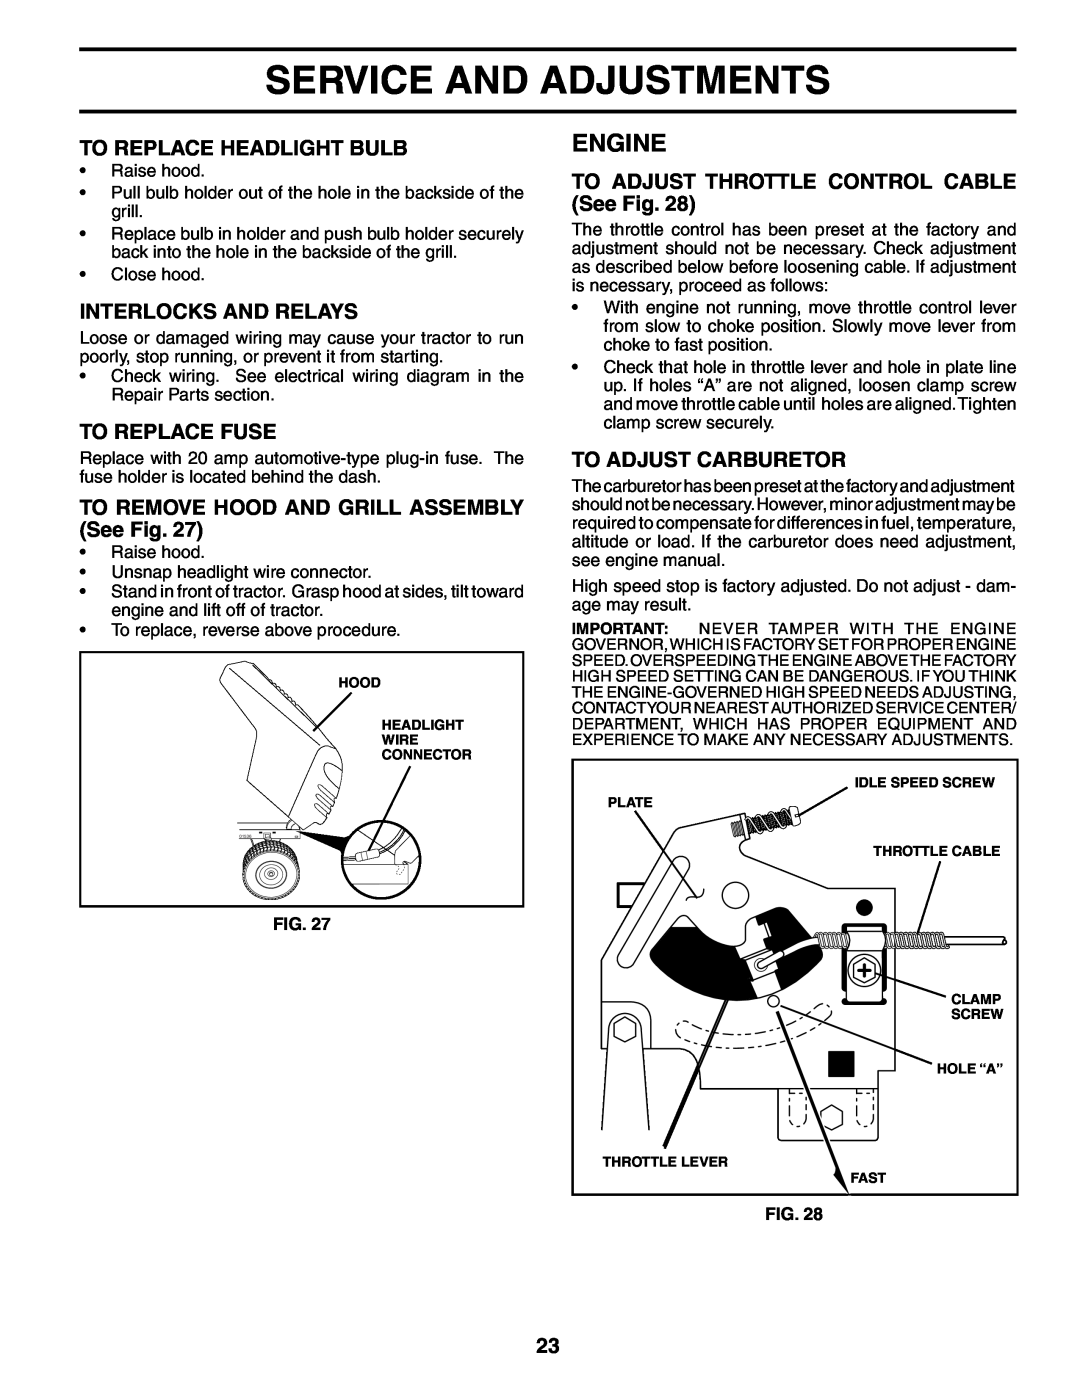 Weed Eater 187637 manual To Replace Headlight Bulb, Interlocks And Relays, To Replace Fuse, To Adjust Carburetor, Engine 